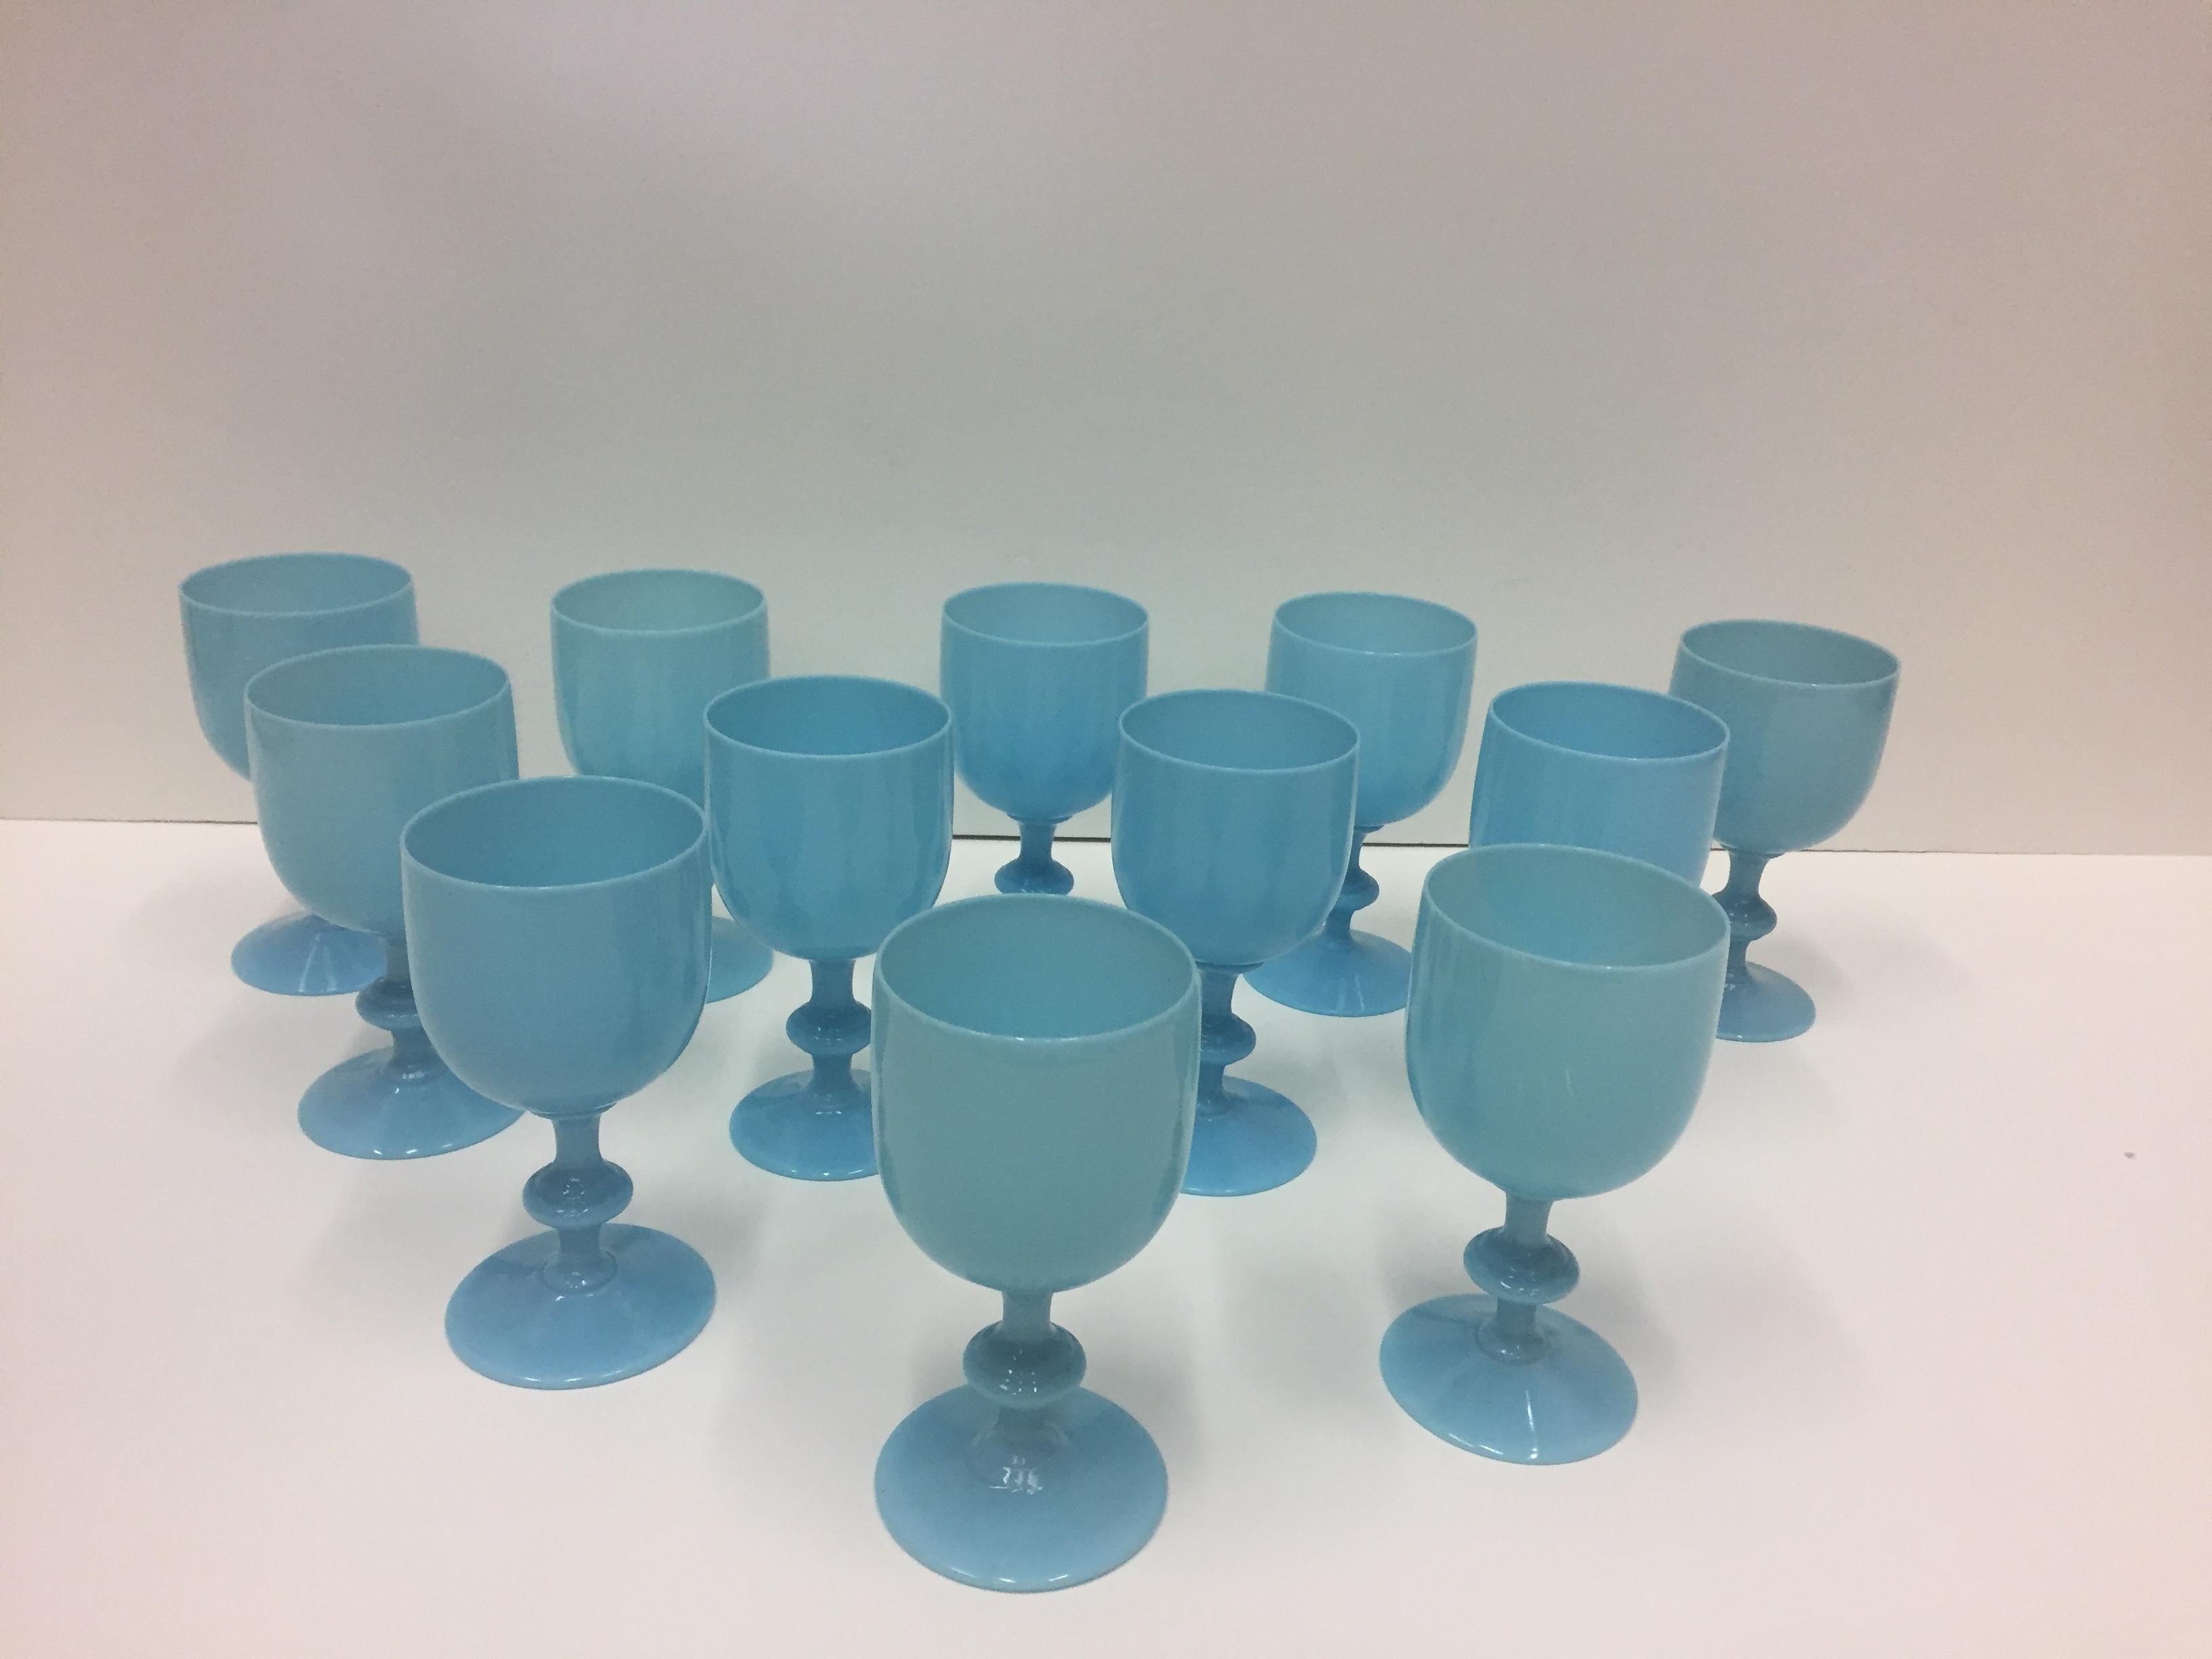 A gorgeous set of Portiex Valle opaline goblets in perfect condition and a fabulous turquoise color.